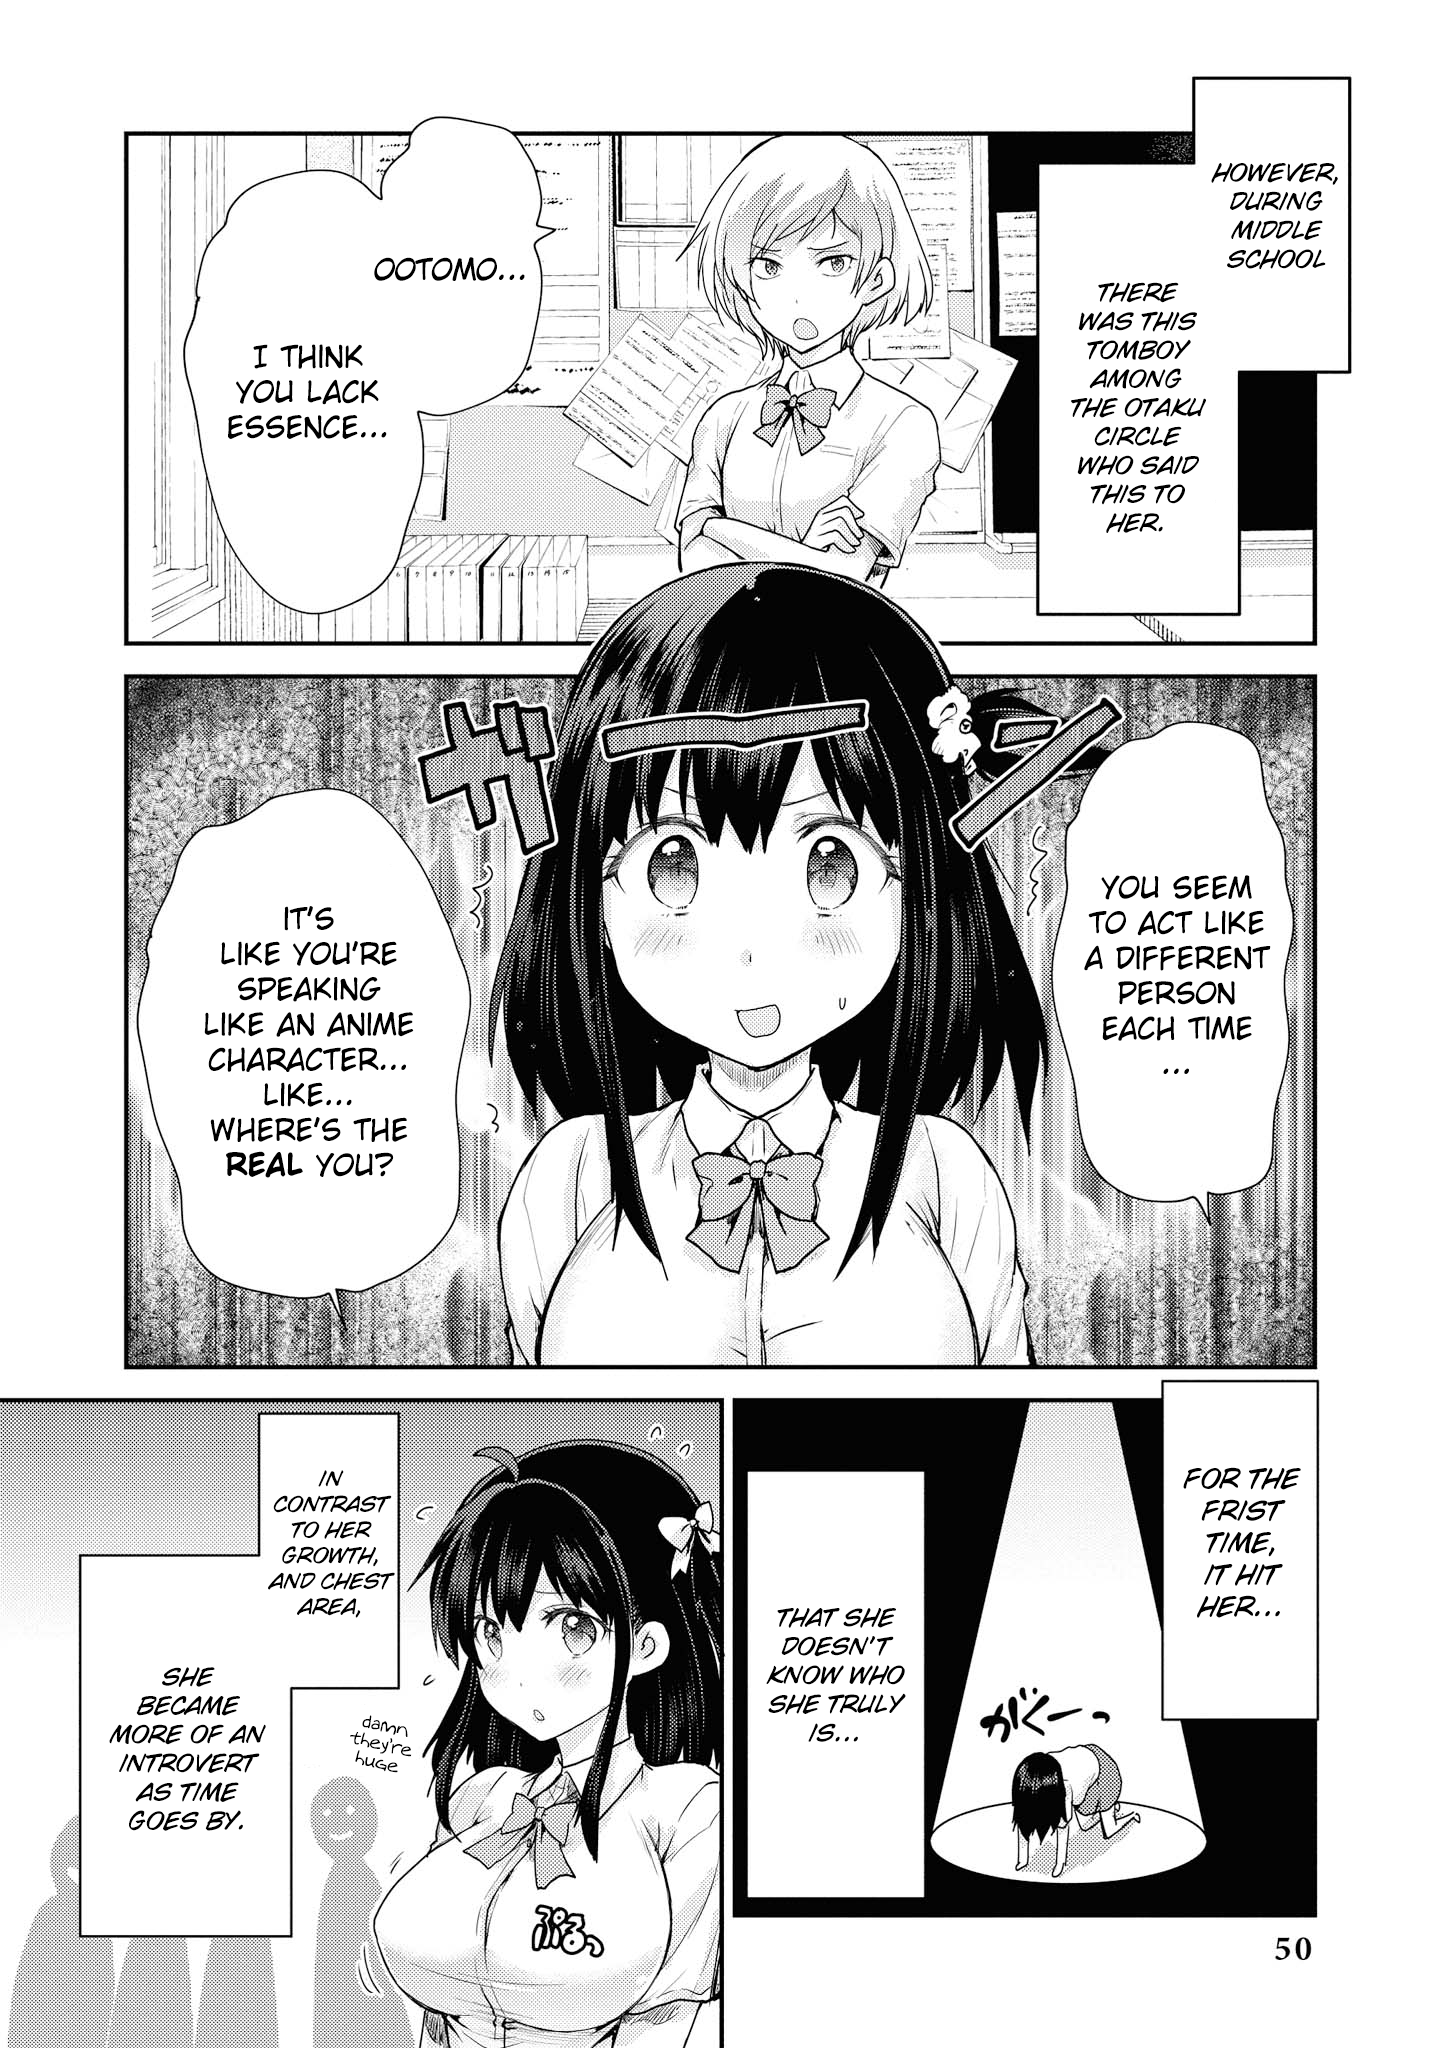 Do You Like Fluffy Boobs? Busty Girl Anthology Comic Vol.7 Chapter 51